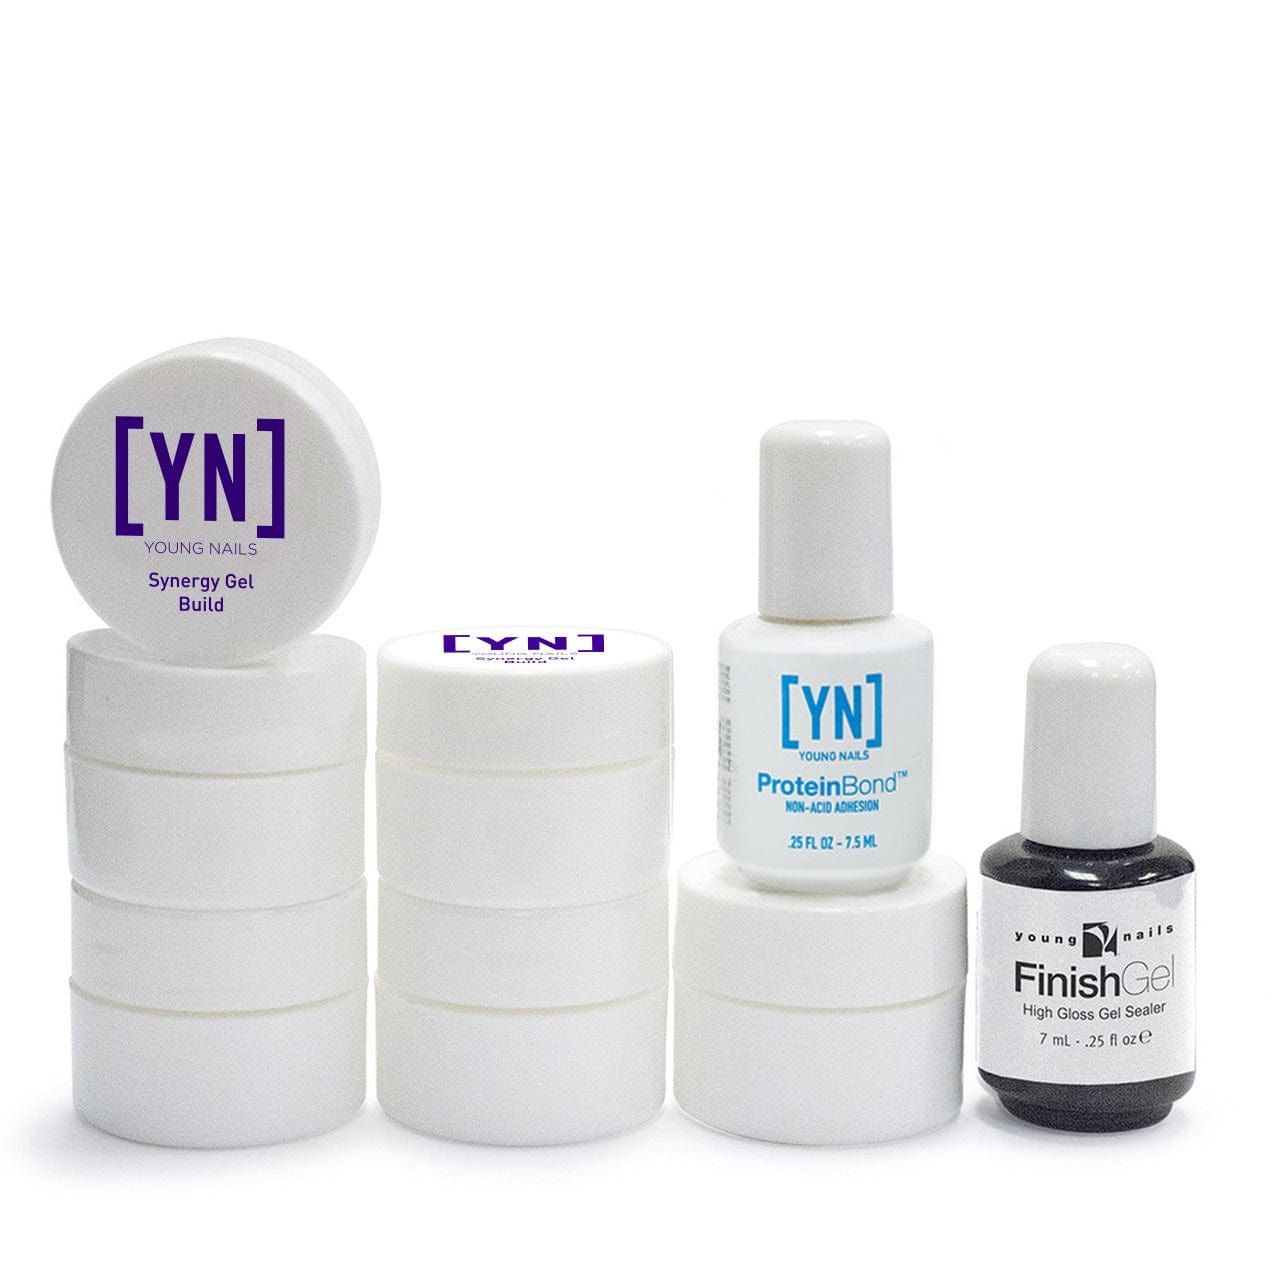 Synergy Gel Trial Kit Nails - Young Nails - Luxe Pacifique